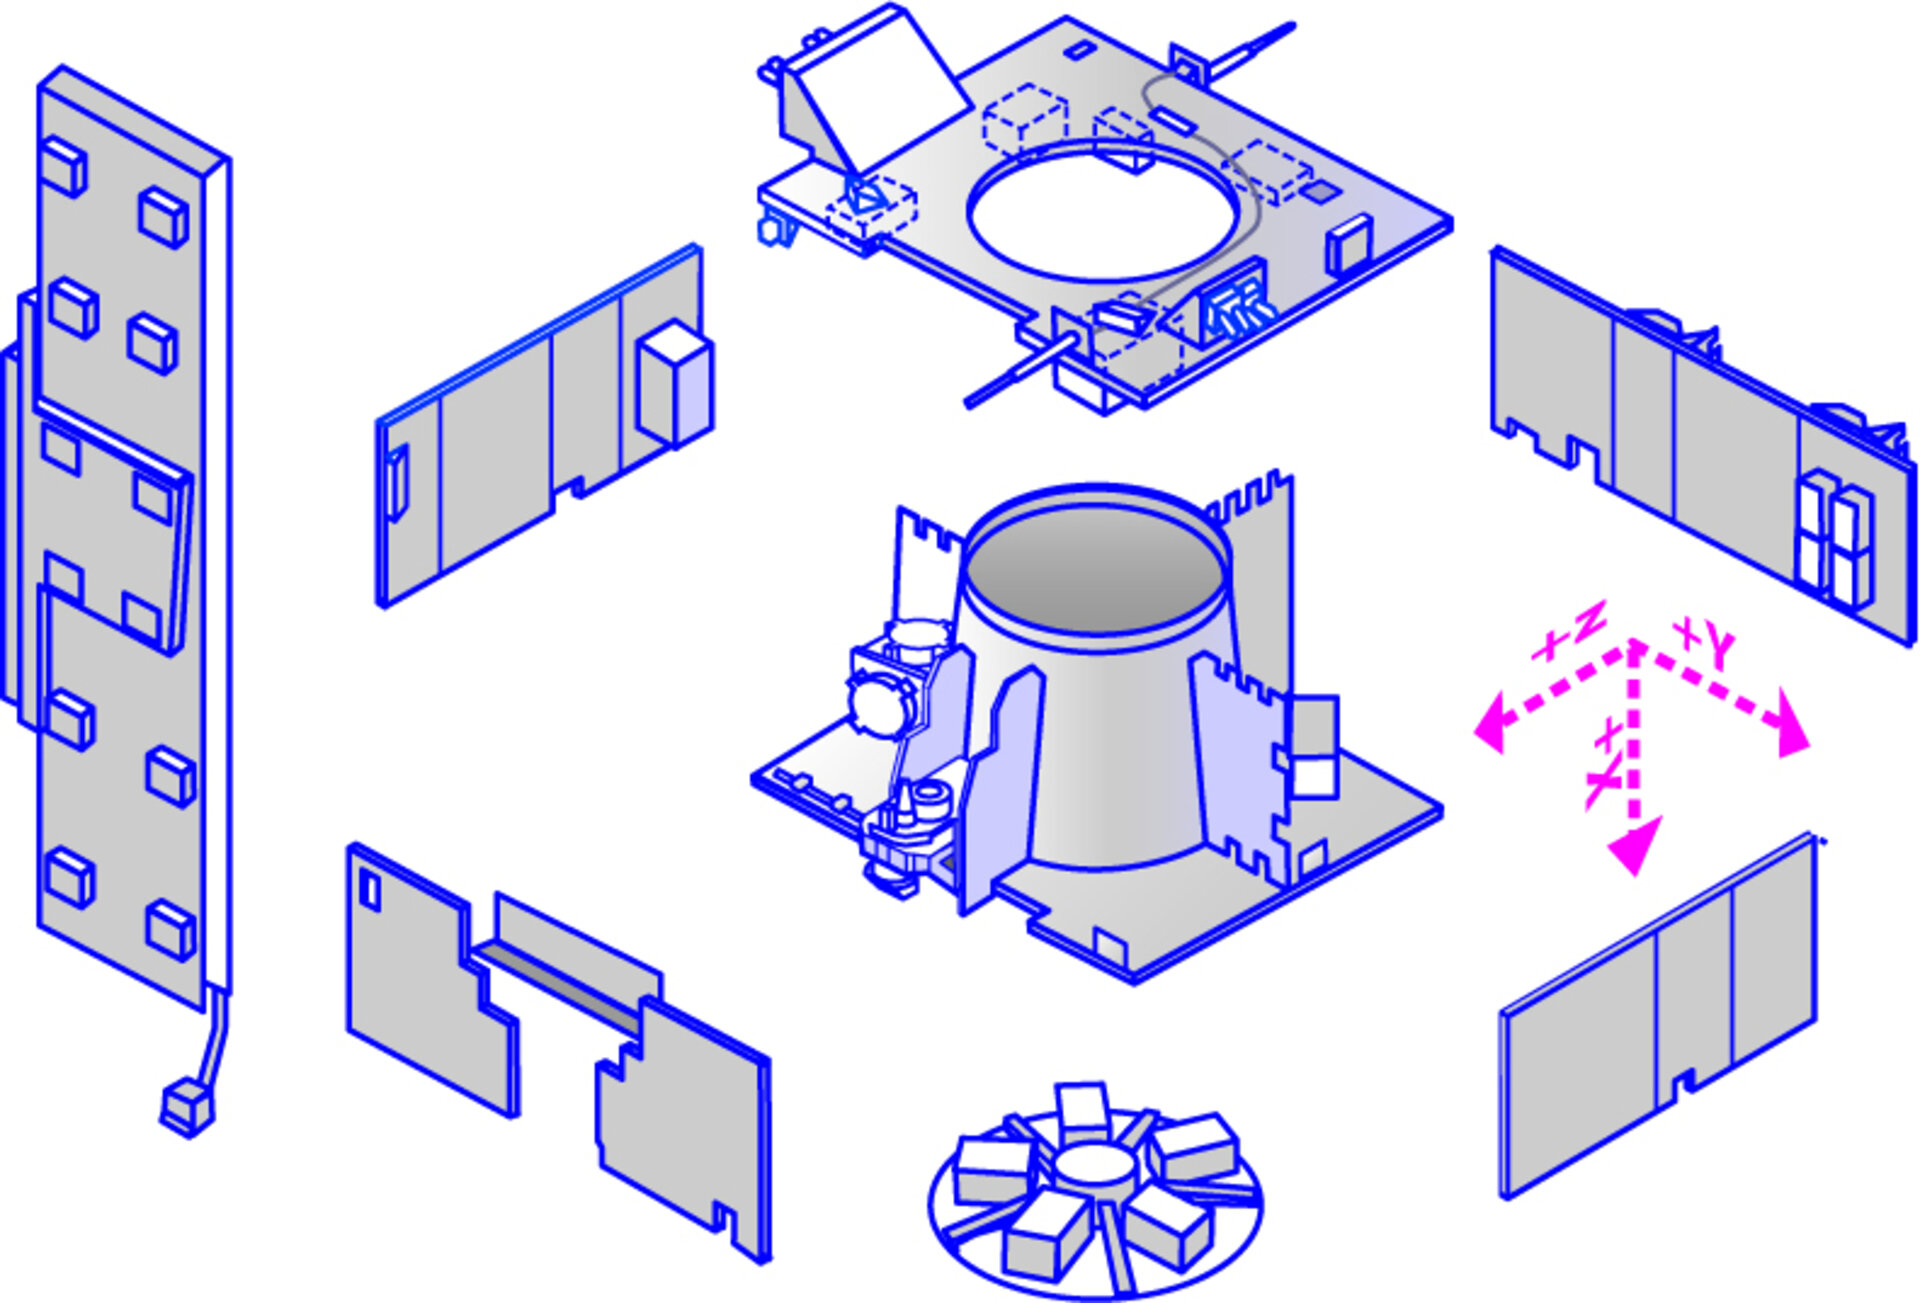 Exploded view of the main subsystems (view 2)